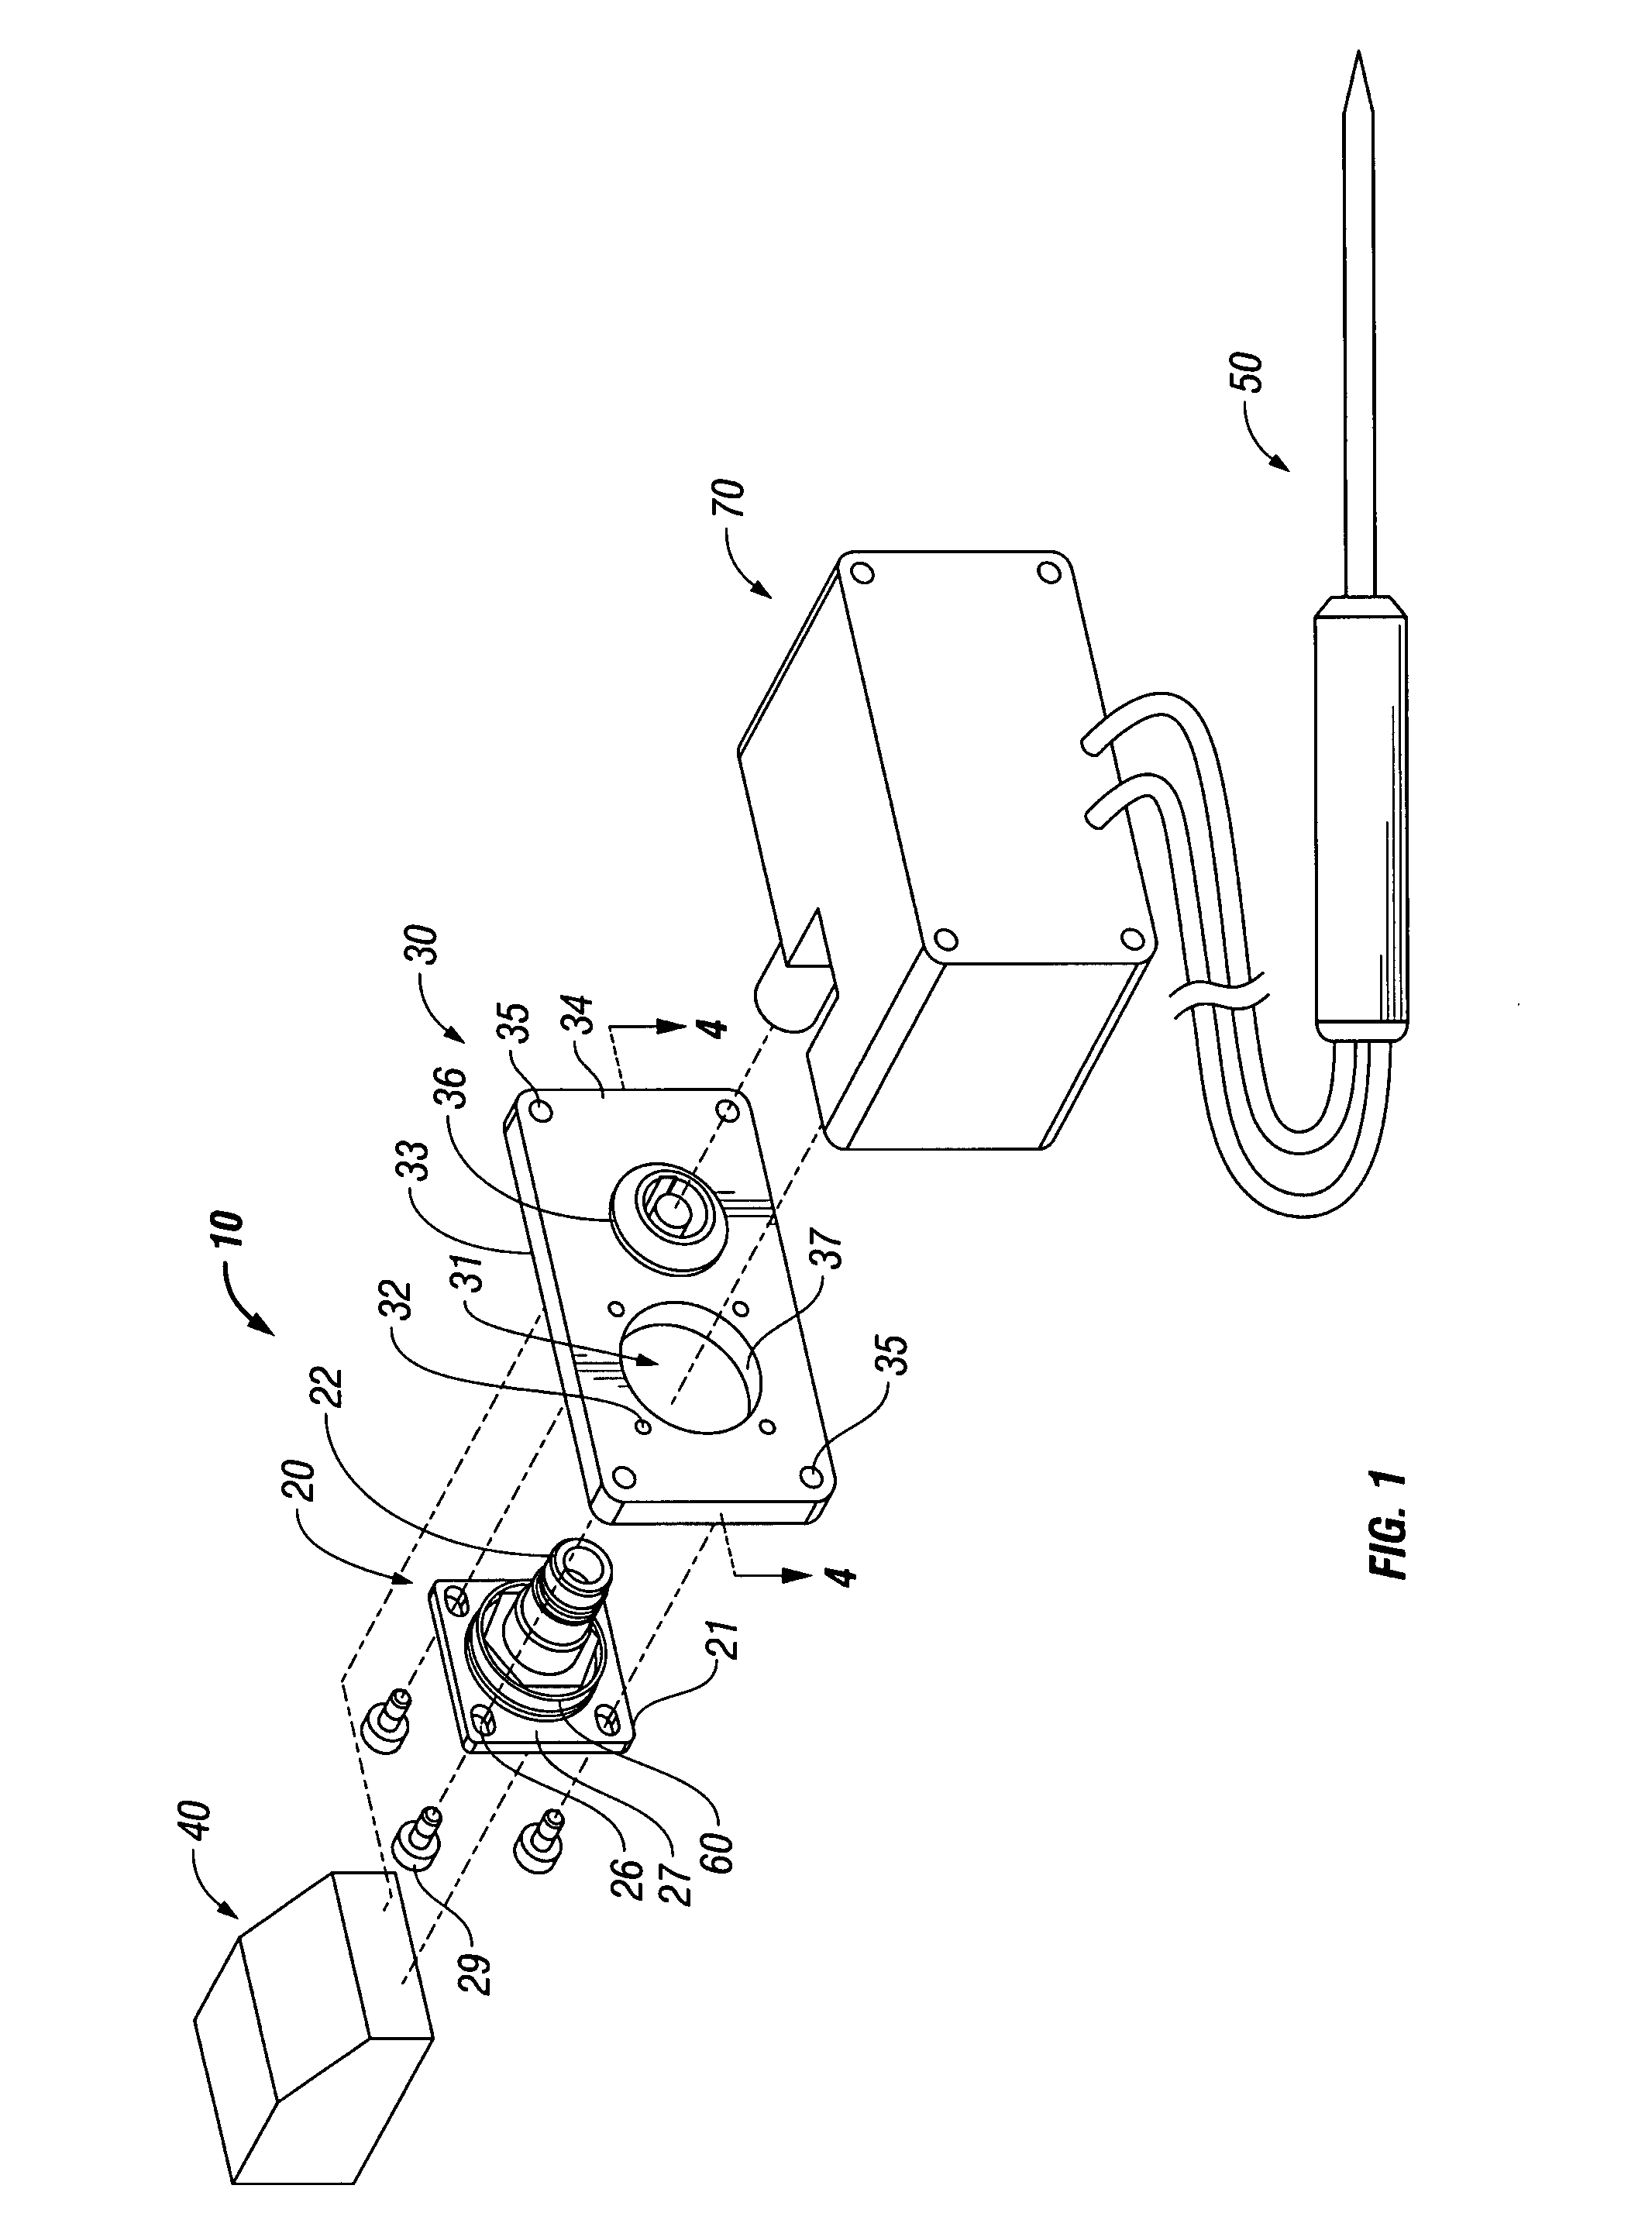 Electrical receptacle assembly